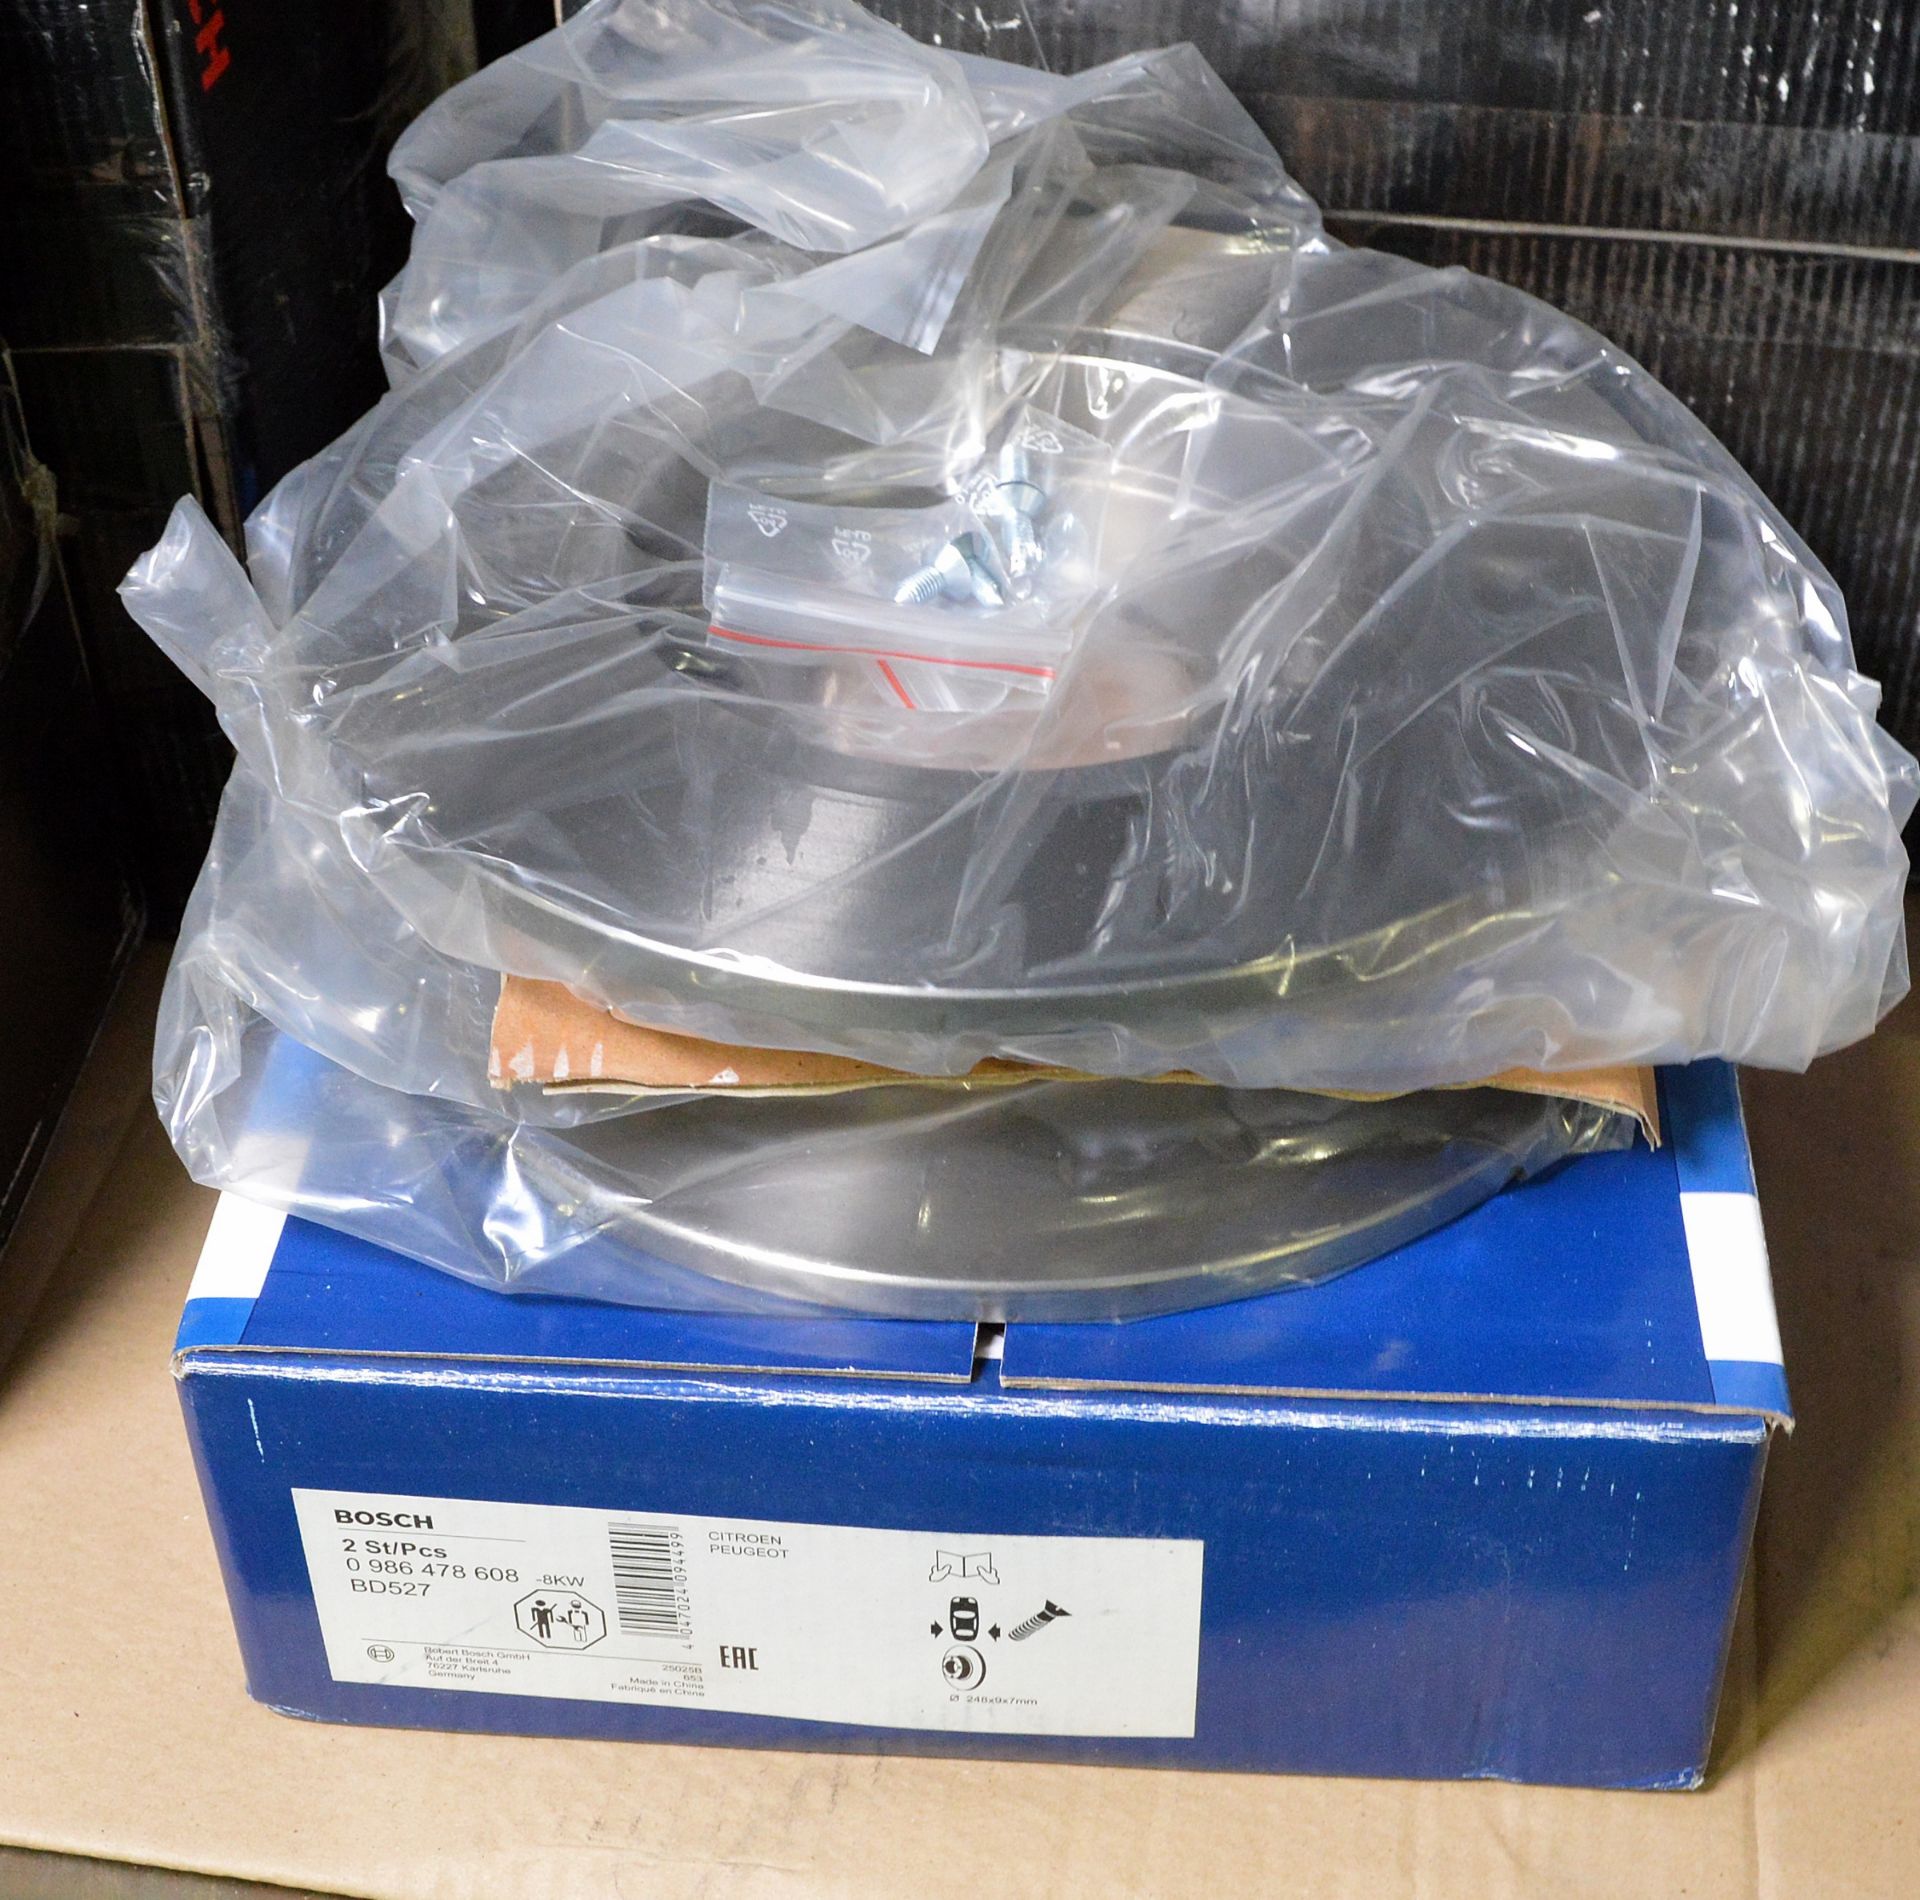 Vehicle parts - Bosch, Mintex, Drivemaster brake discs - see pictures for models and types - Image 5 of 5